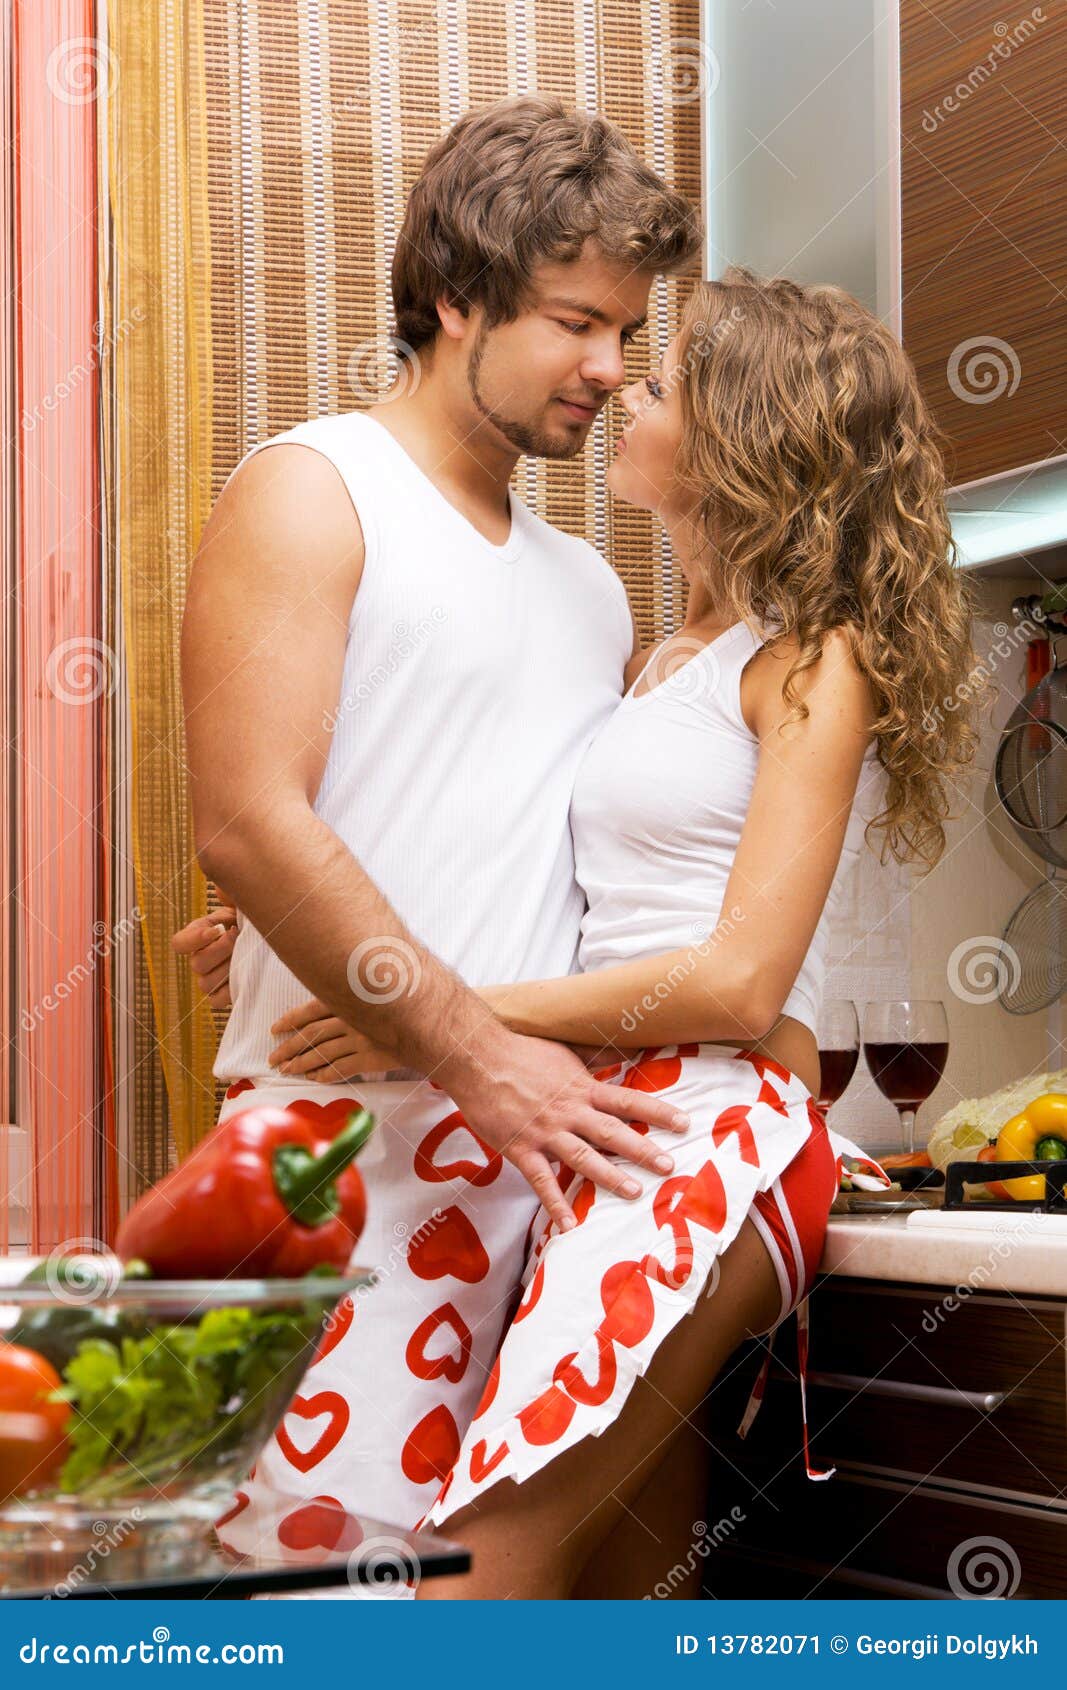 Young Romantic Couple Kitchen 13782071 